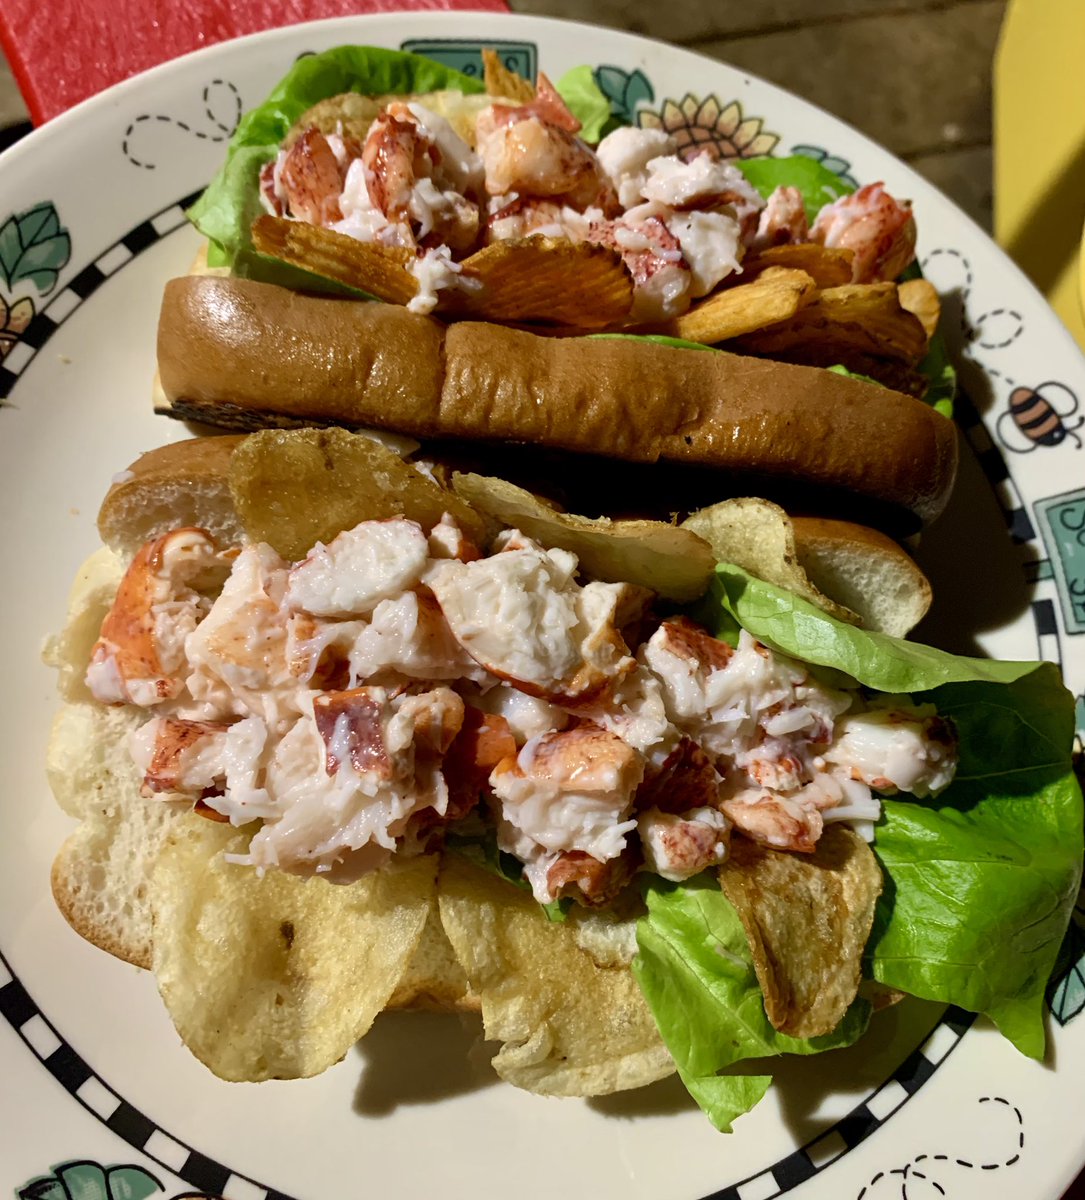 OMG! Delicious #LobsterRolls with perfectly toasted buns over the campfire, New Brunswick #lobster and @CBchips for that perfect salty crunch. 🦞❤️😋 🔥 @KouchibouguacNP @TravelMediaCA @TourismeNB #ExploreNB #TMACTravel @DarcyRhyno @cottagedaze